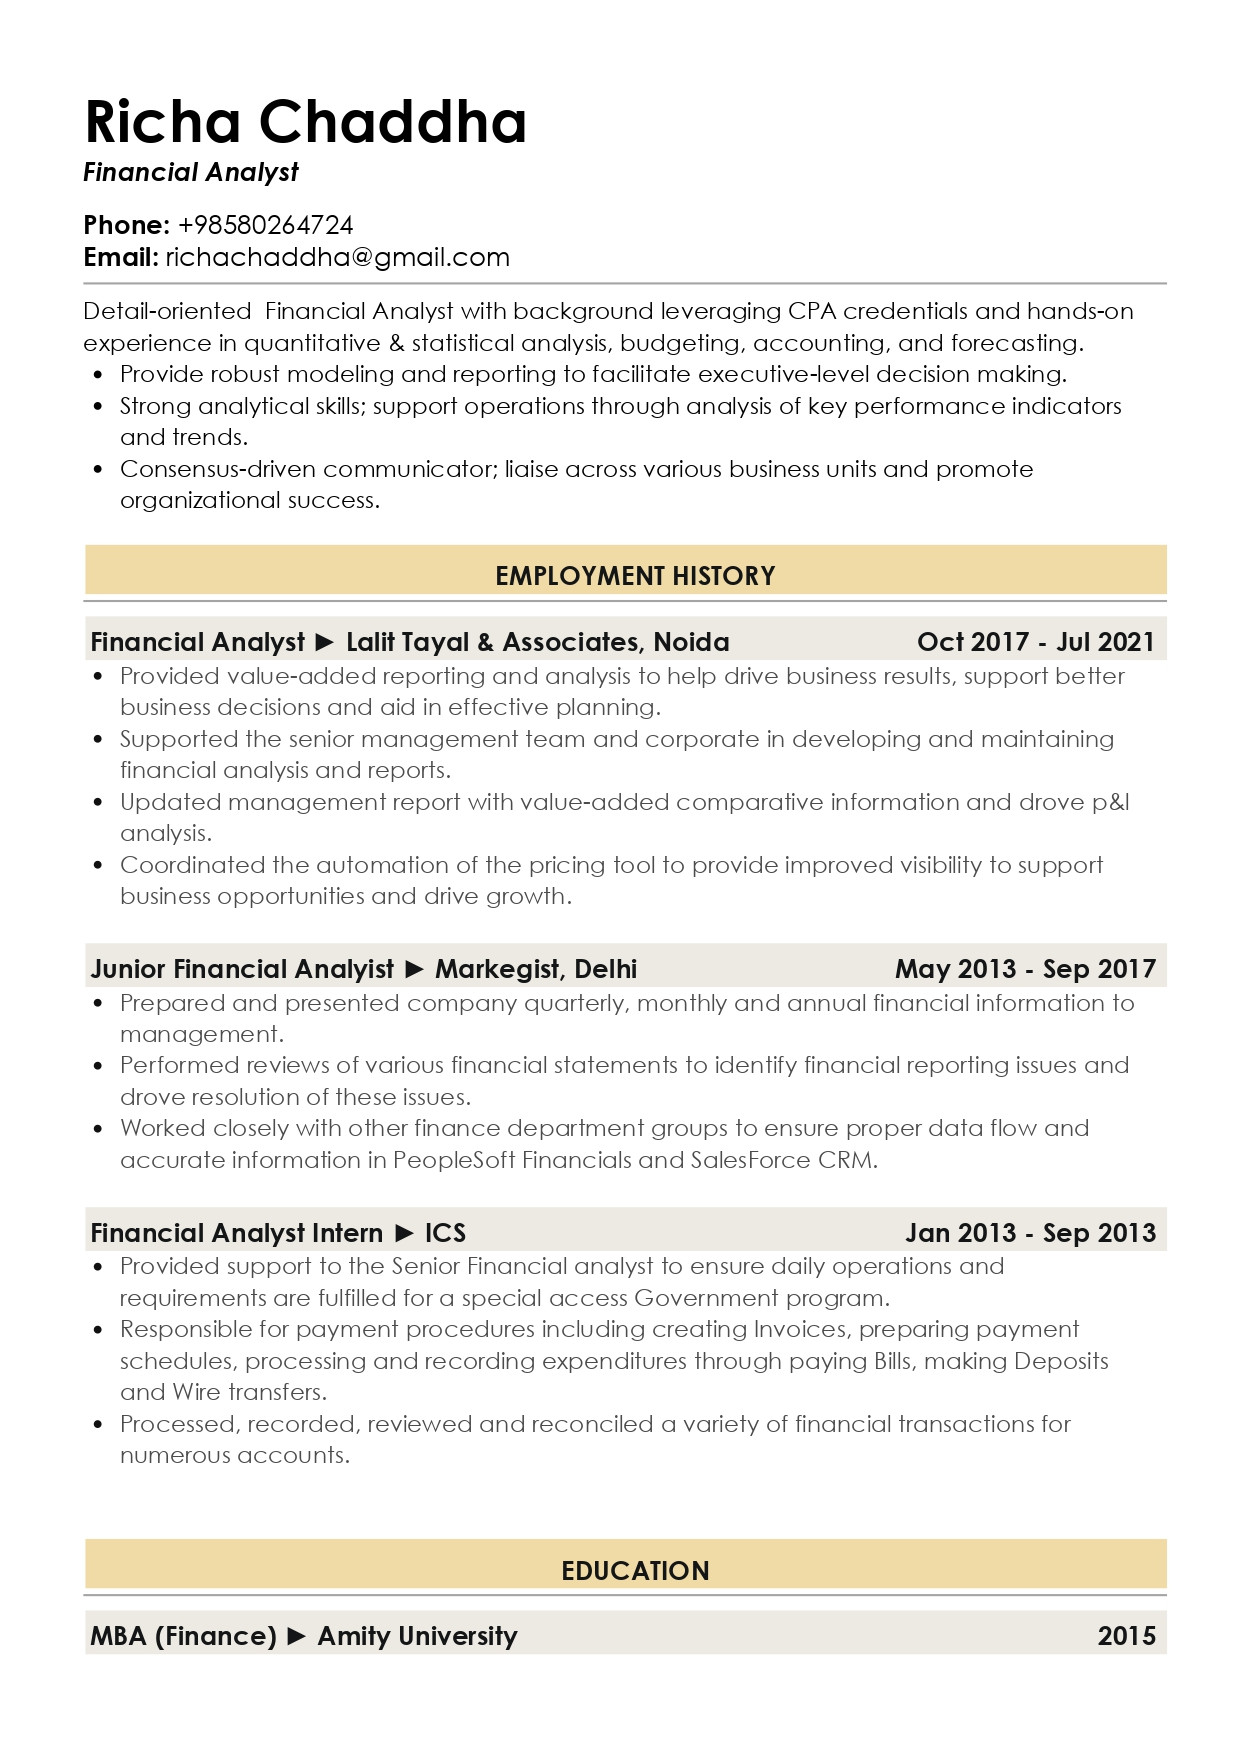 Financial Planning and Analyst Resume Sample Sample Resume Of Financial Analyst1 with Template & Writing Guide …